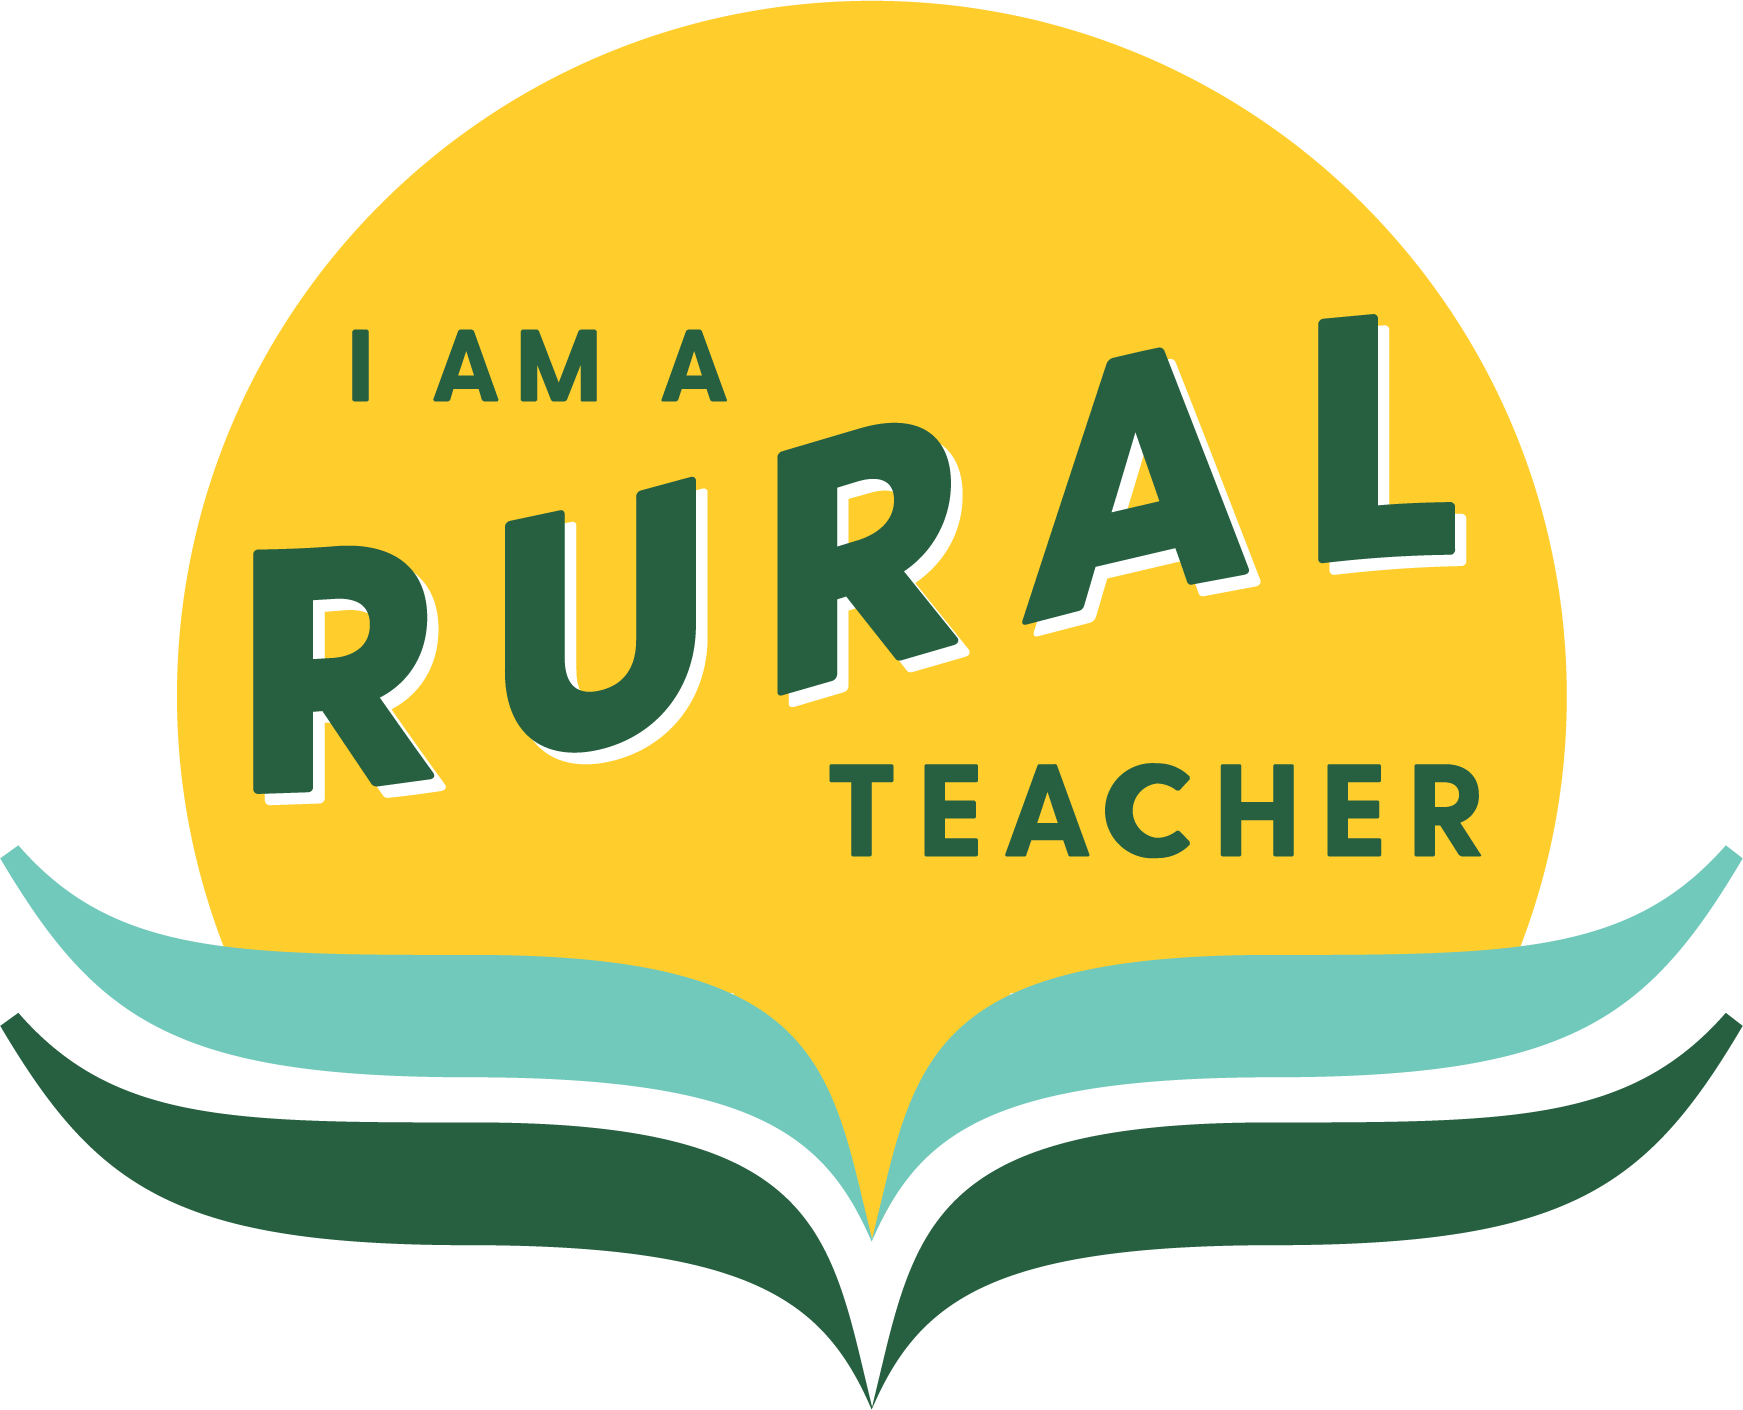 Logo for I Am a Rural Teacher program, a project of Rural Schools Collaborative and National Rural Education Association.